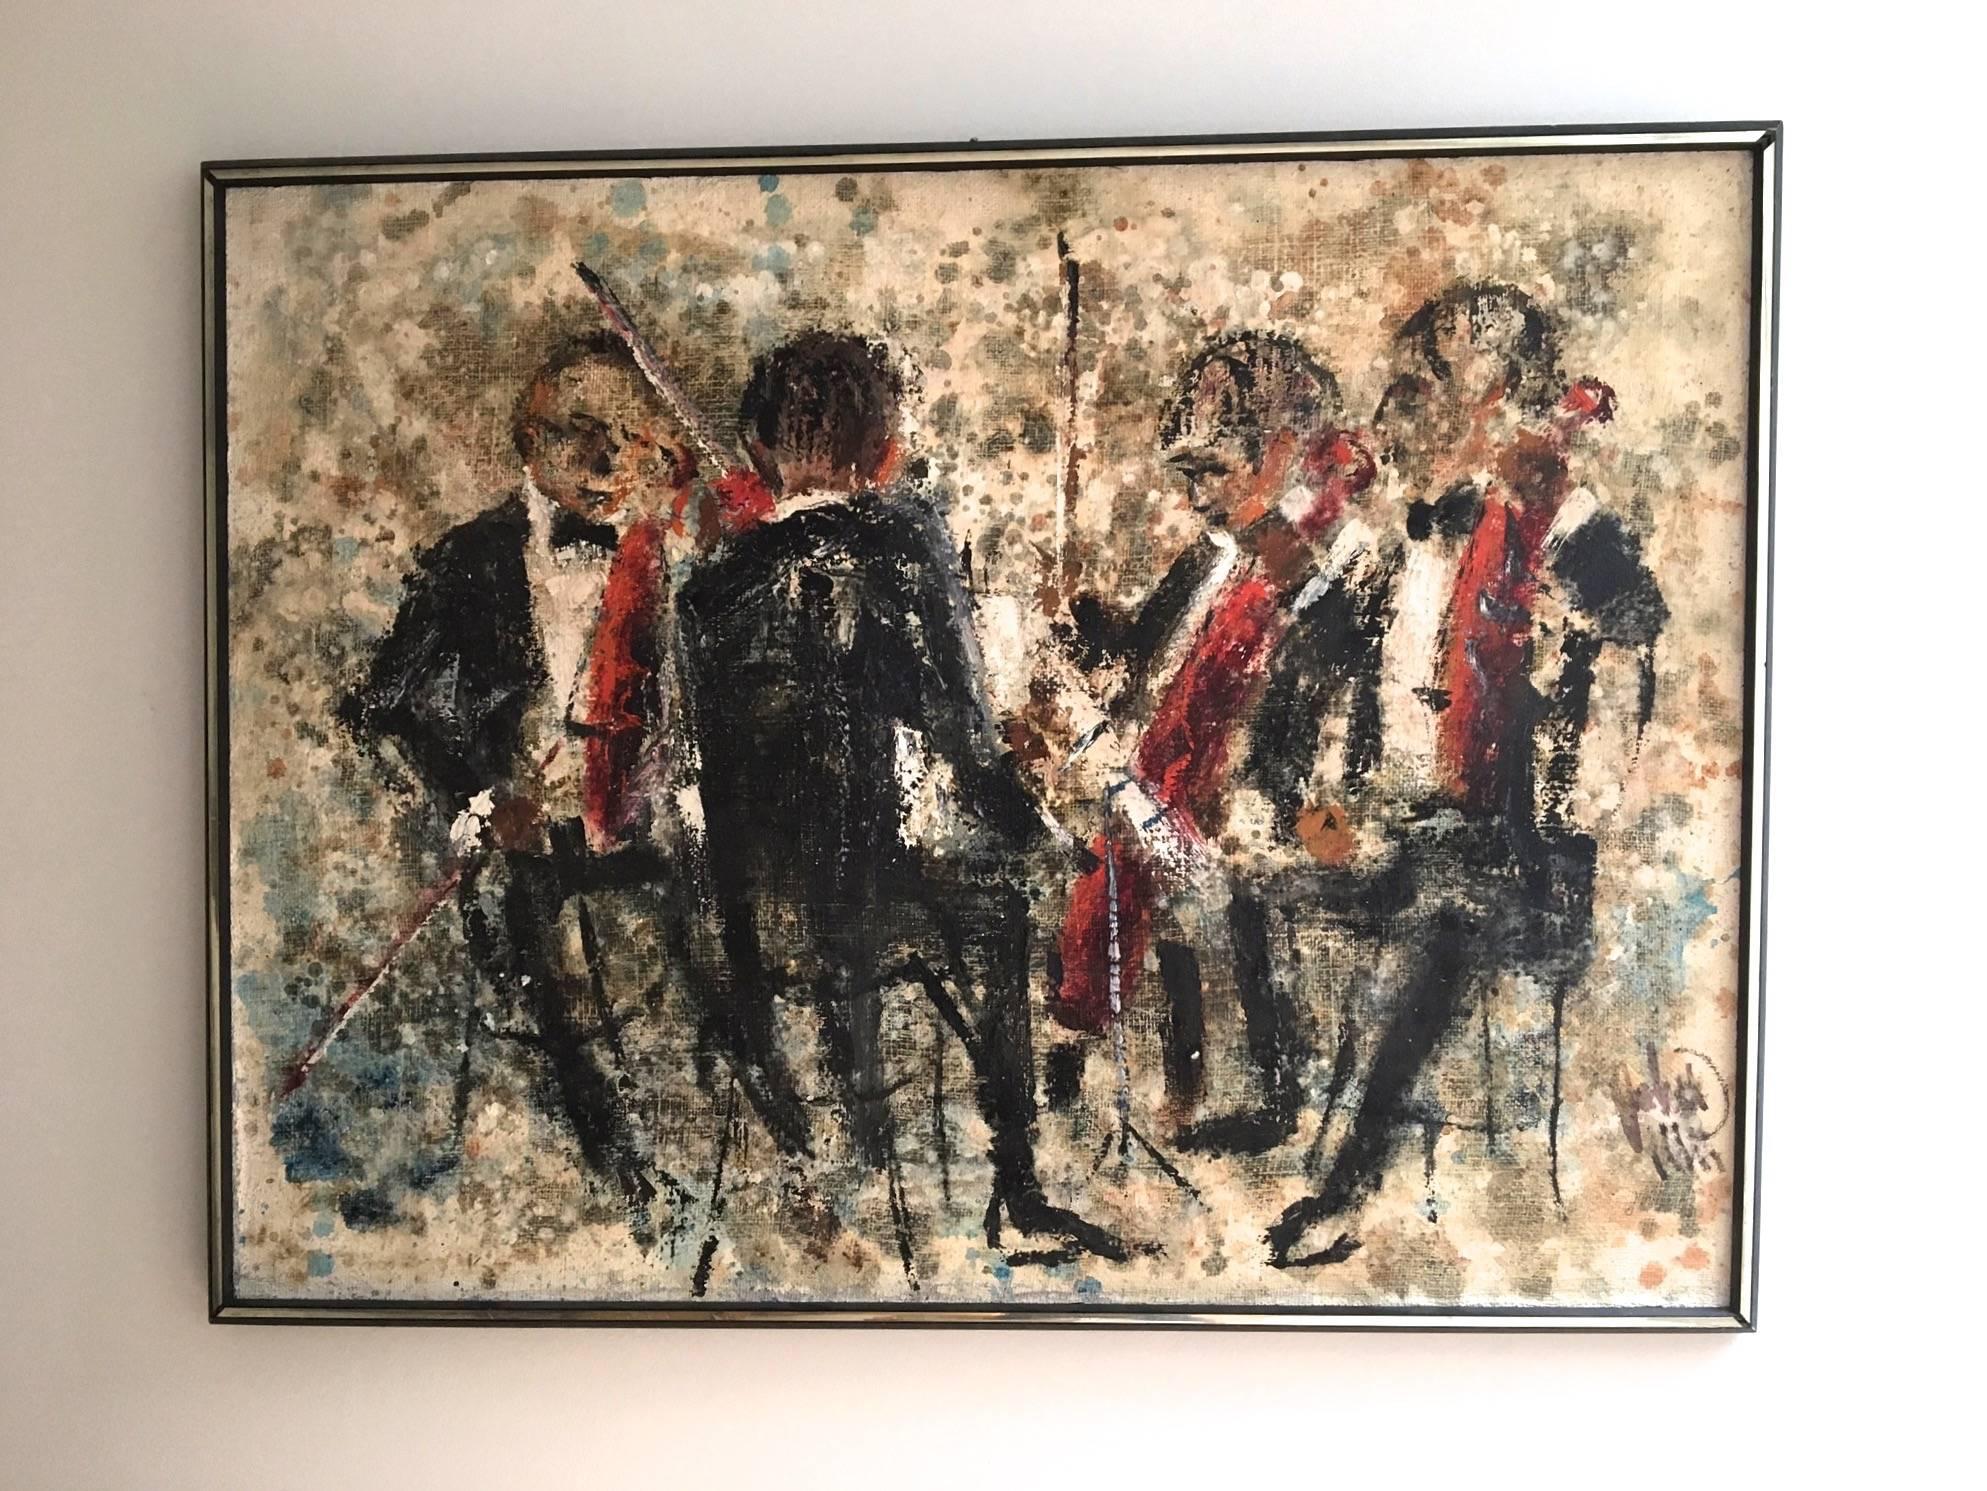 Expressionist painting Group of Musicians Playing Violin in black, red, white and beige colors.
Oil on burlap signed illegibly lower right, original frame, violin player expressionist style from about 1960s. Size: 29 x39